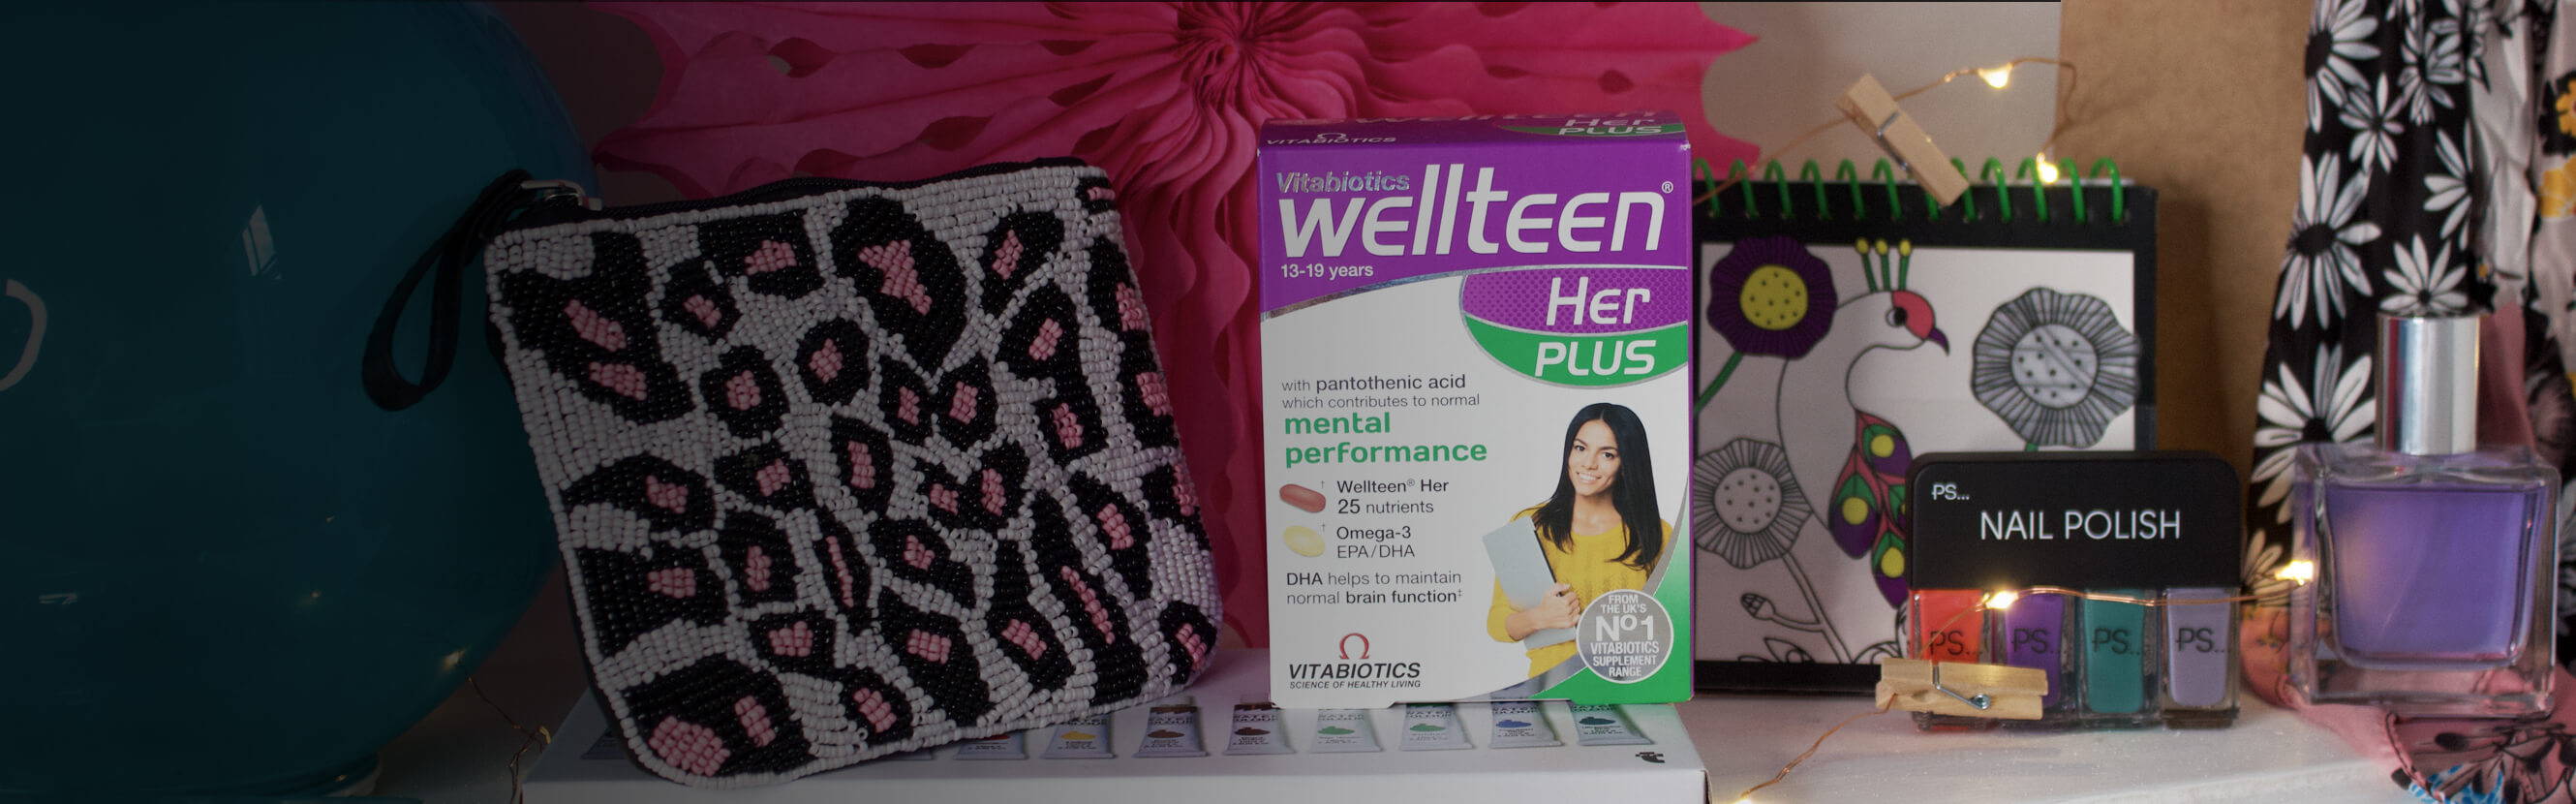  Set the habits for a healthy, happy lifestyle – the foundation for out-of-this-world achievement. Wellteen Her Plus, with important nutrients and valuable Omega 3, is based on the Wellteen formula, as studied by the University of Oxford. Great for when maintaining a balanced diet doesn’t come easy. 